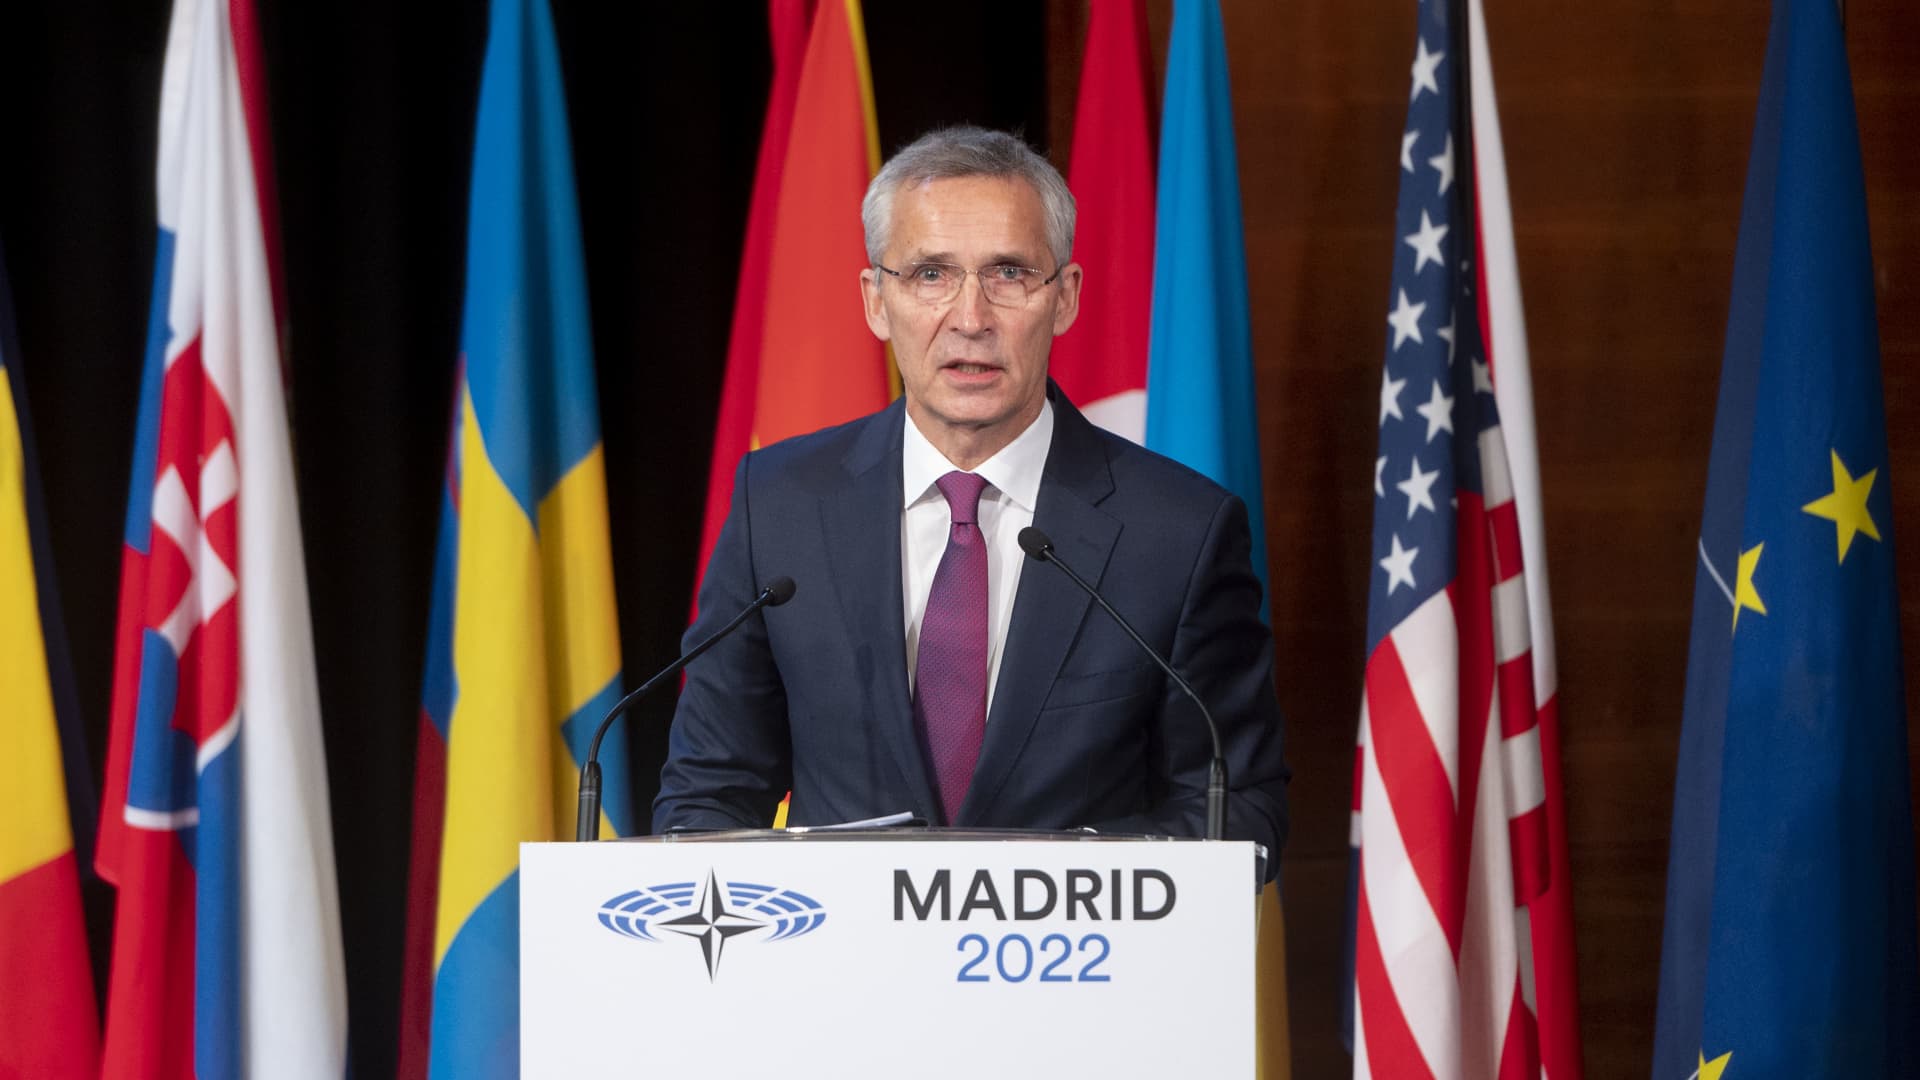 North Atlantic Treaty Organization (NATO) Secretary General Jens Stoltenberg speaks during the plenary session of the third day of the 68th Annual Session of the Parliamentary Assembly in the Auditorium Ground Floor Room at the Hotel Melia Castilla, Nov. 21, 2022, in Madrid, Spain.